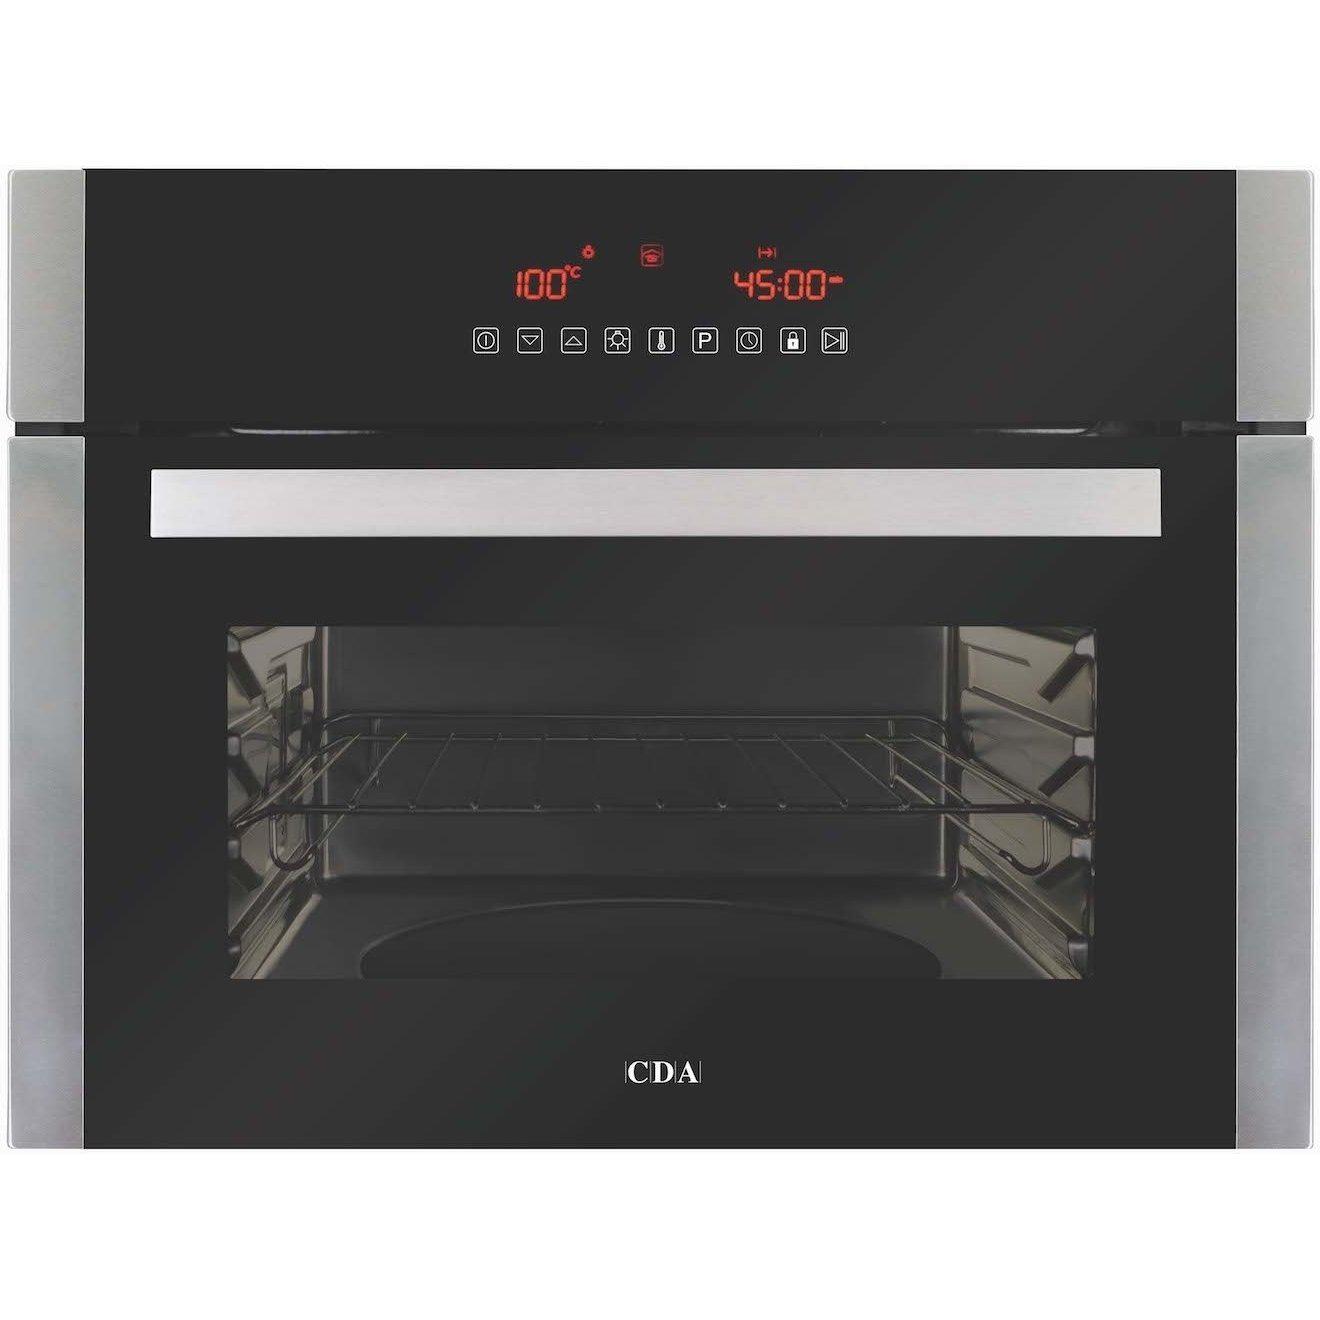 Cda Vk702ss Compact Steam Oven With Grill Stainless Steel Limited Clearance Offer